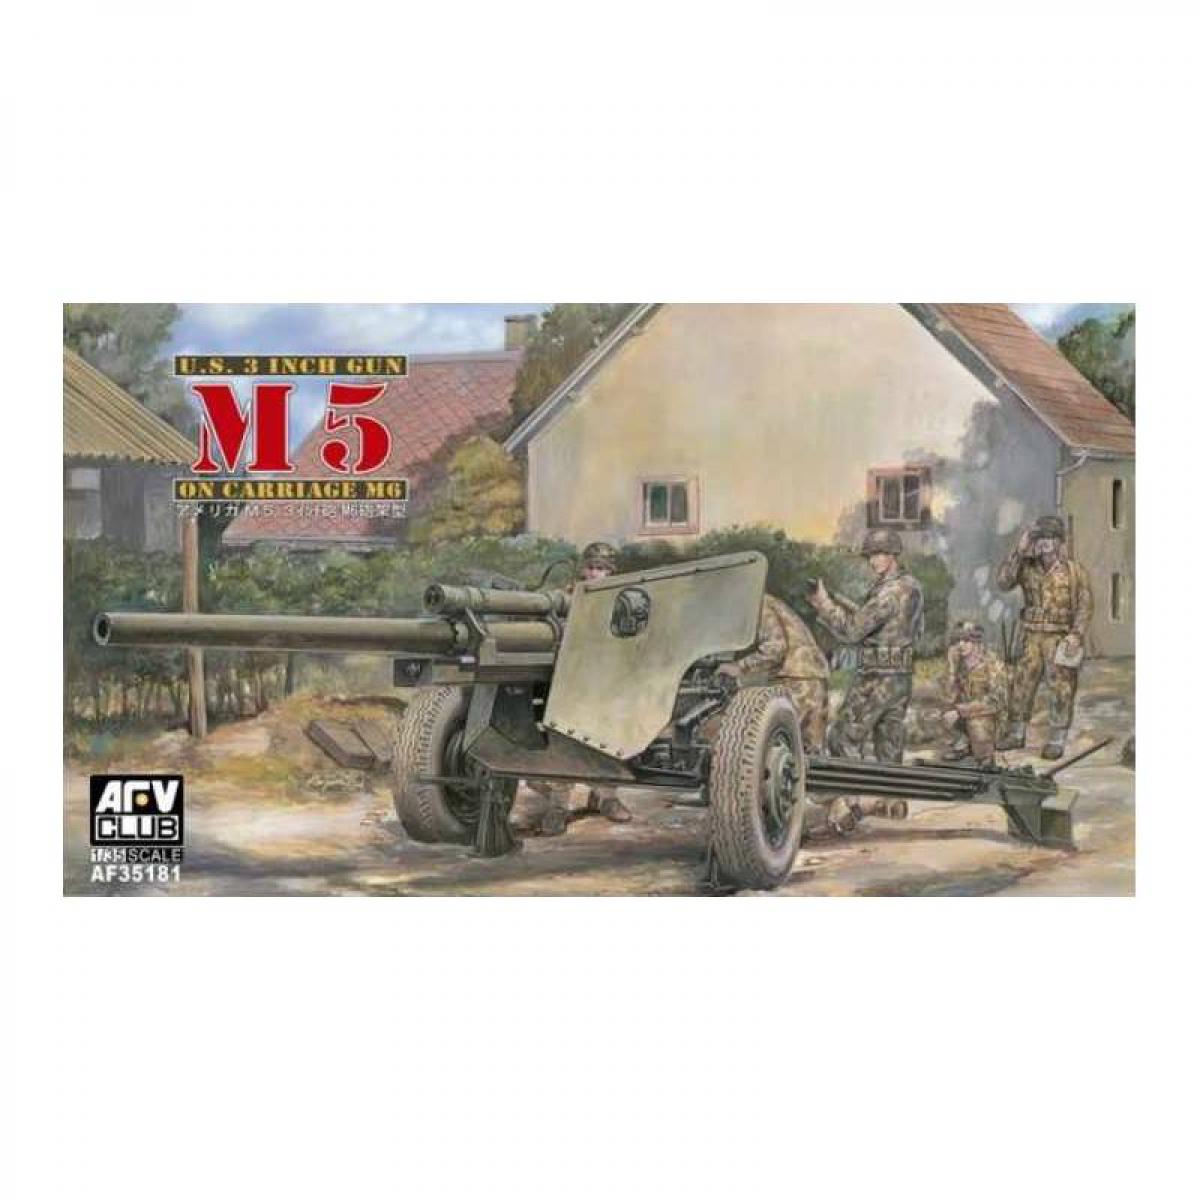 Afv Club - Maquette Véhicule U.s. 3 Inch Howitzer M5 On Carriage M6 - Voitures